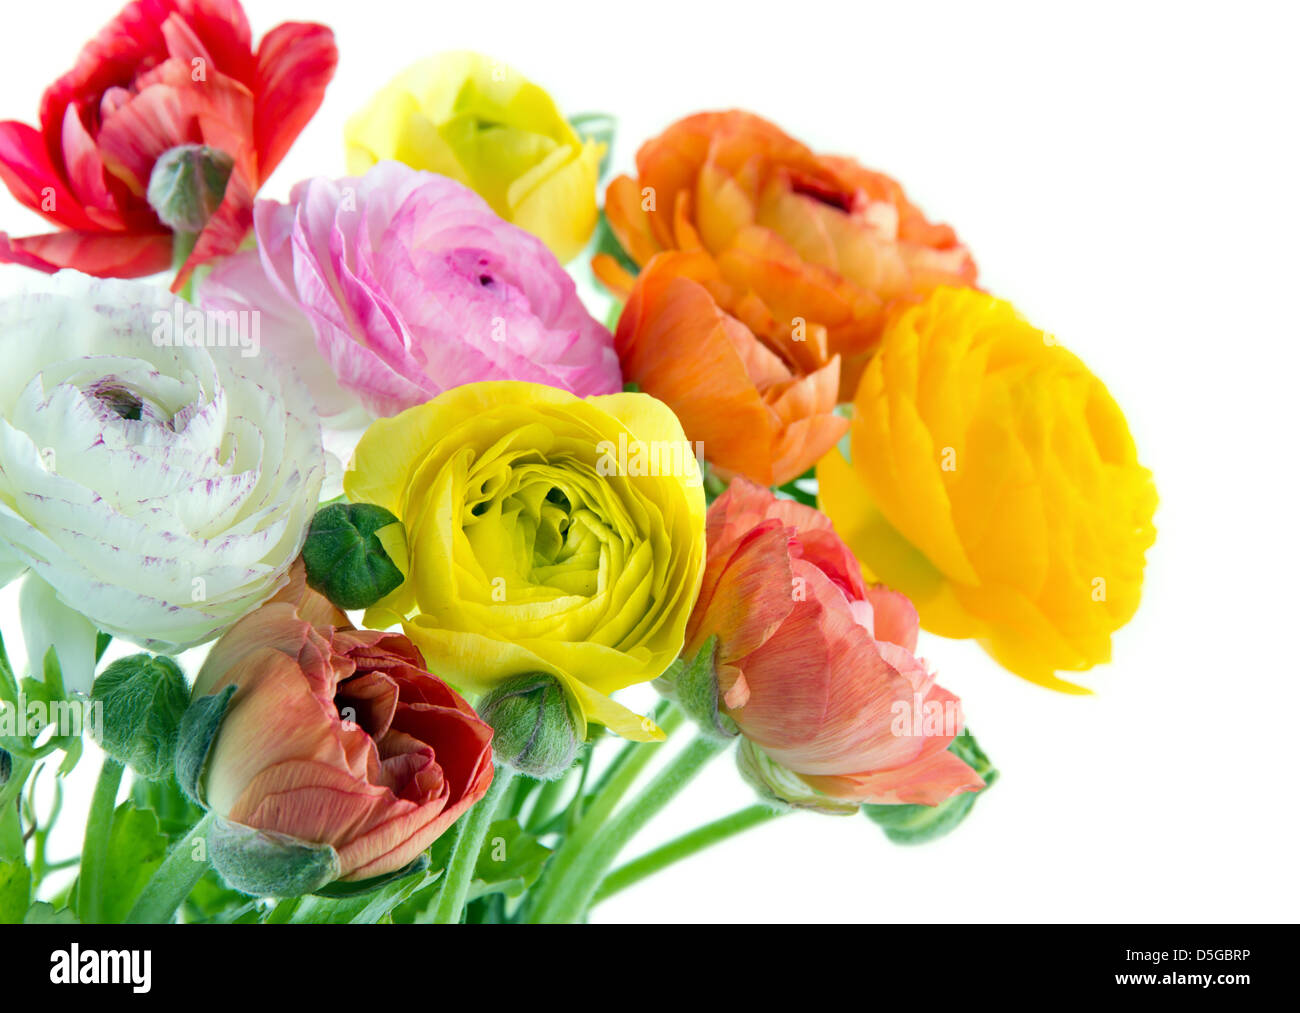 Colorful ranunculus flowers on vintage wooden background Stock Photo